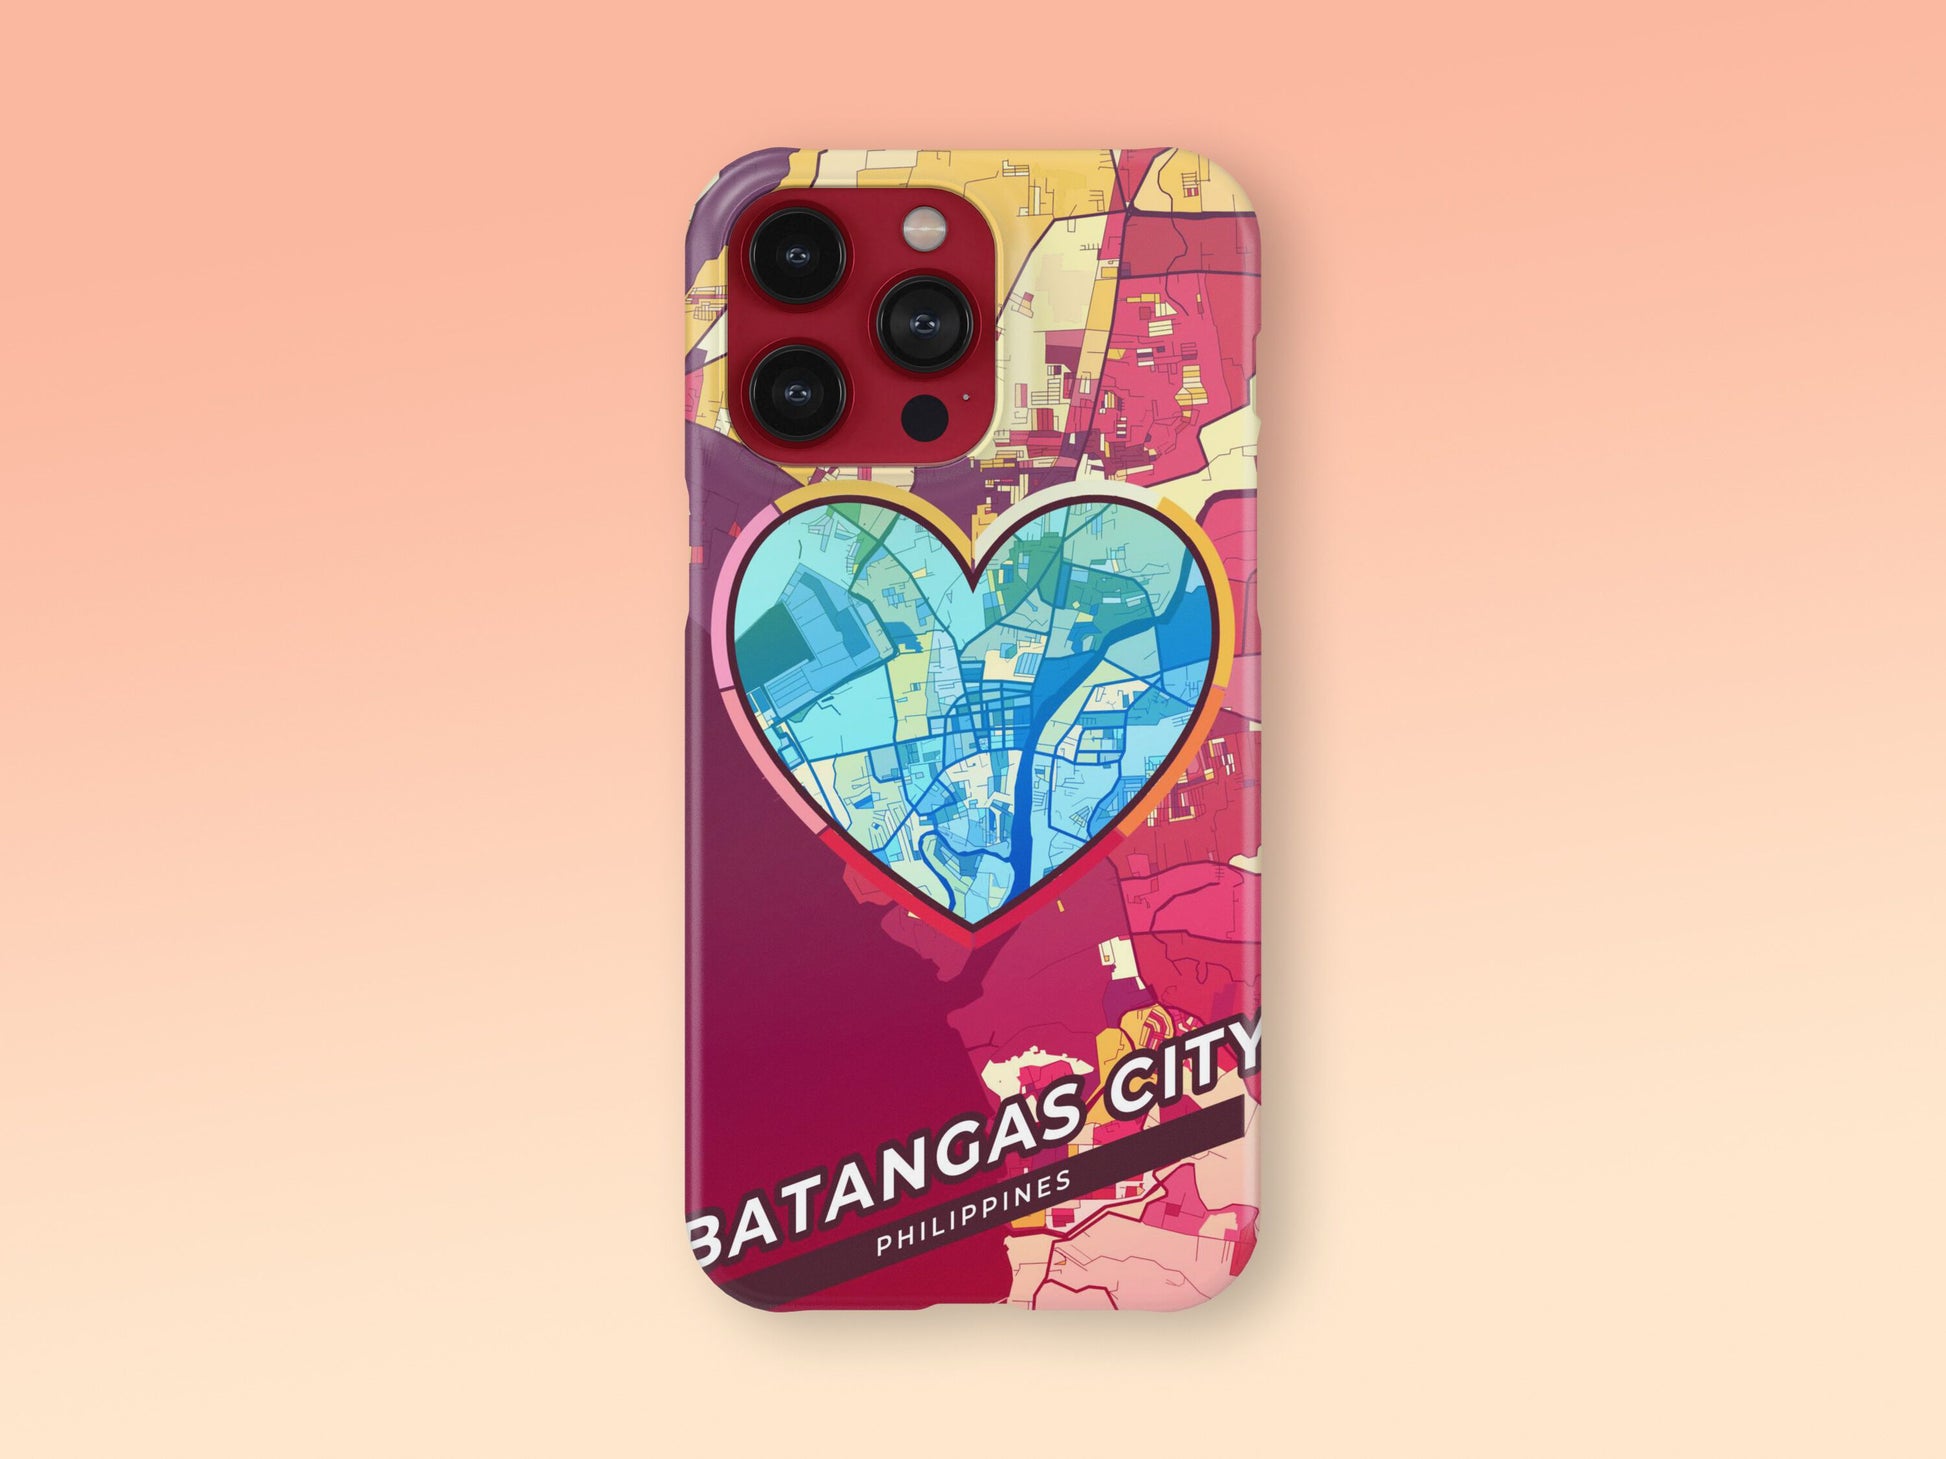 Batangas City Philippines slim phone case with colorful icon. Birthday, wedding or housewarming gift. Couple match cases. 2